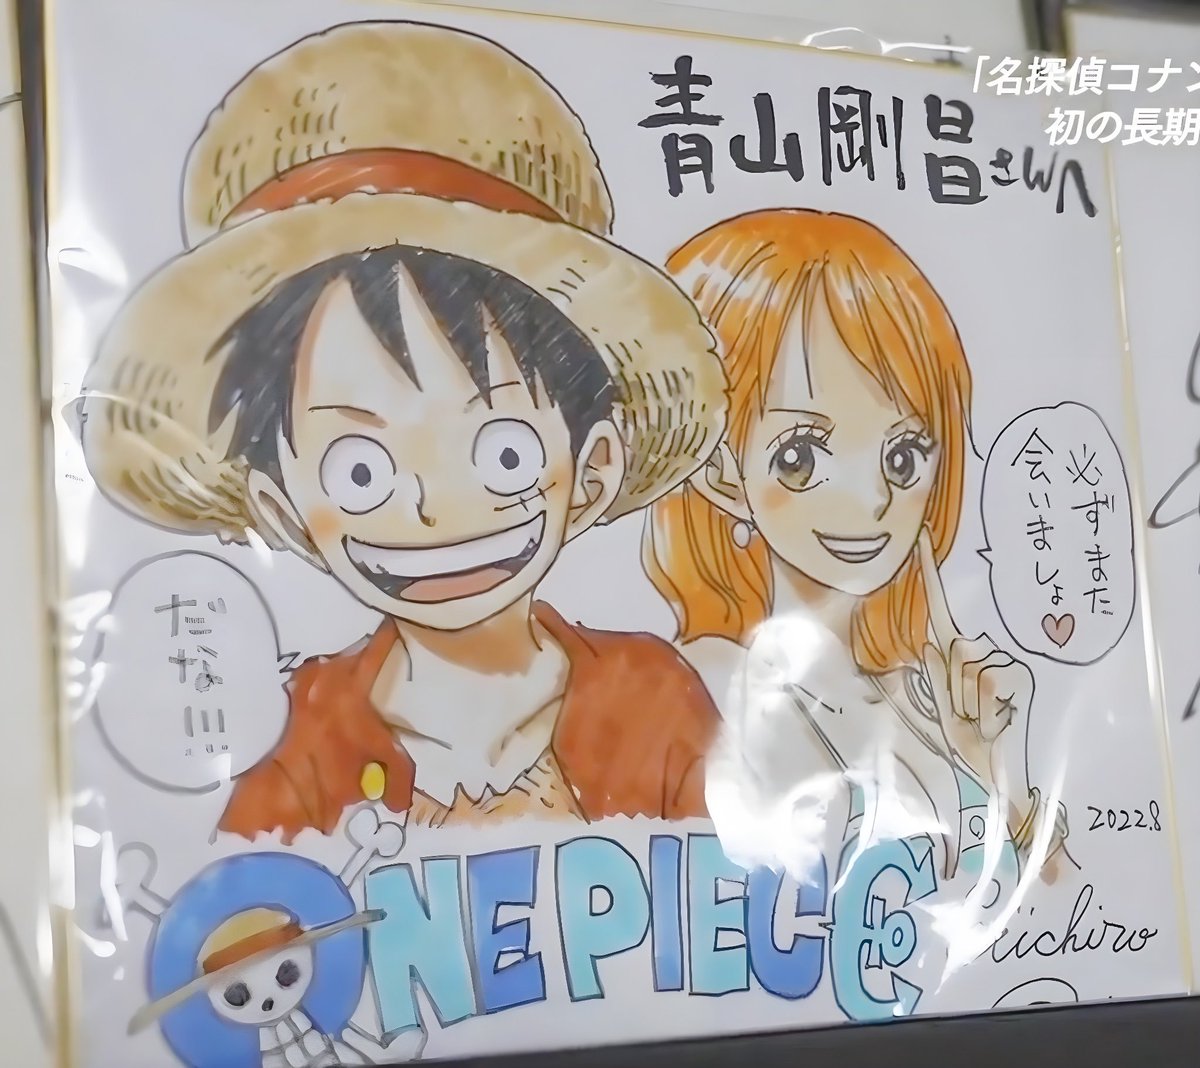 A clear version of the autograph that Oda gifted to Gosho Aoyama in 2022 when they met.

Nami's : 'We will definitely meet again ♡'   

Luffy's : 'Yes!!!'